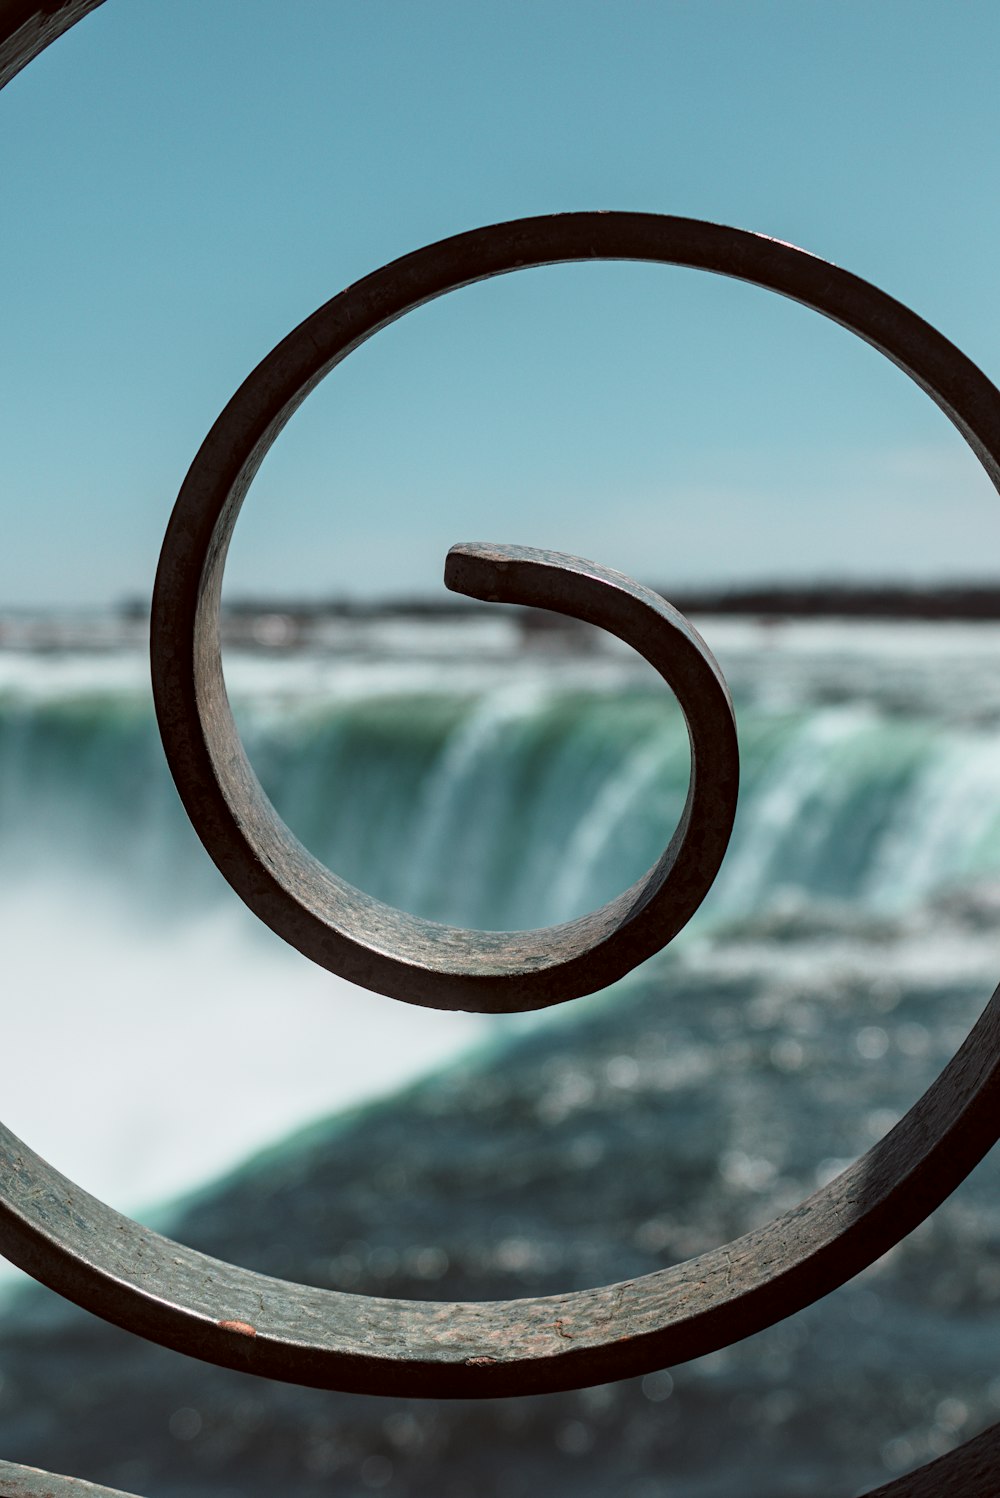 a close up of a metal object with a waterfall in the background